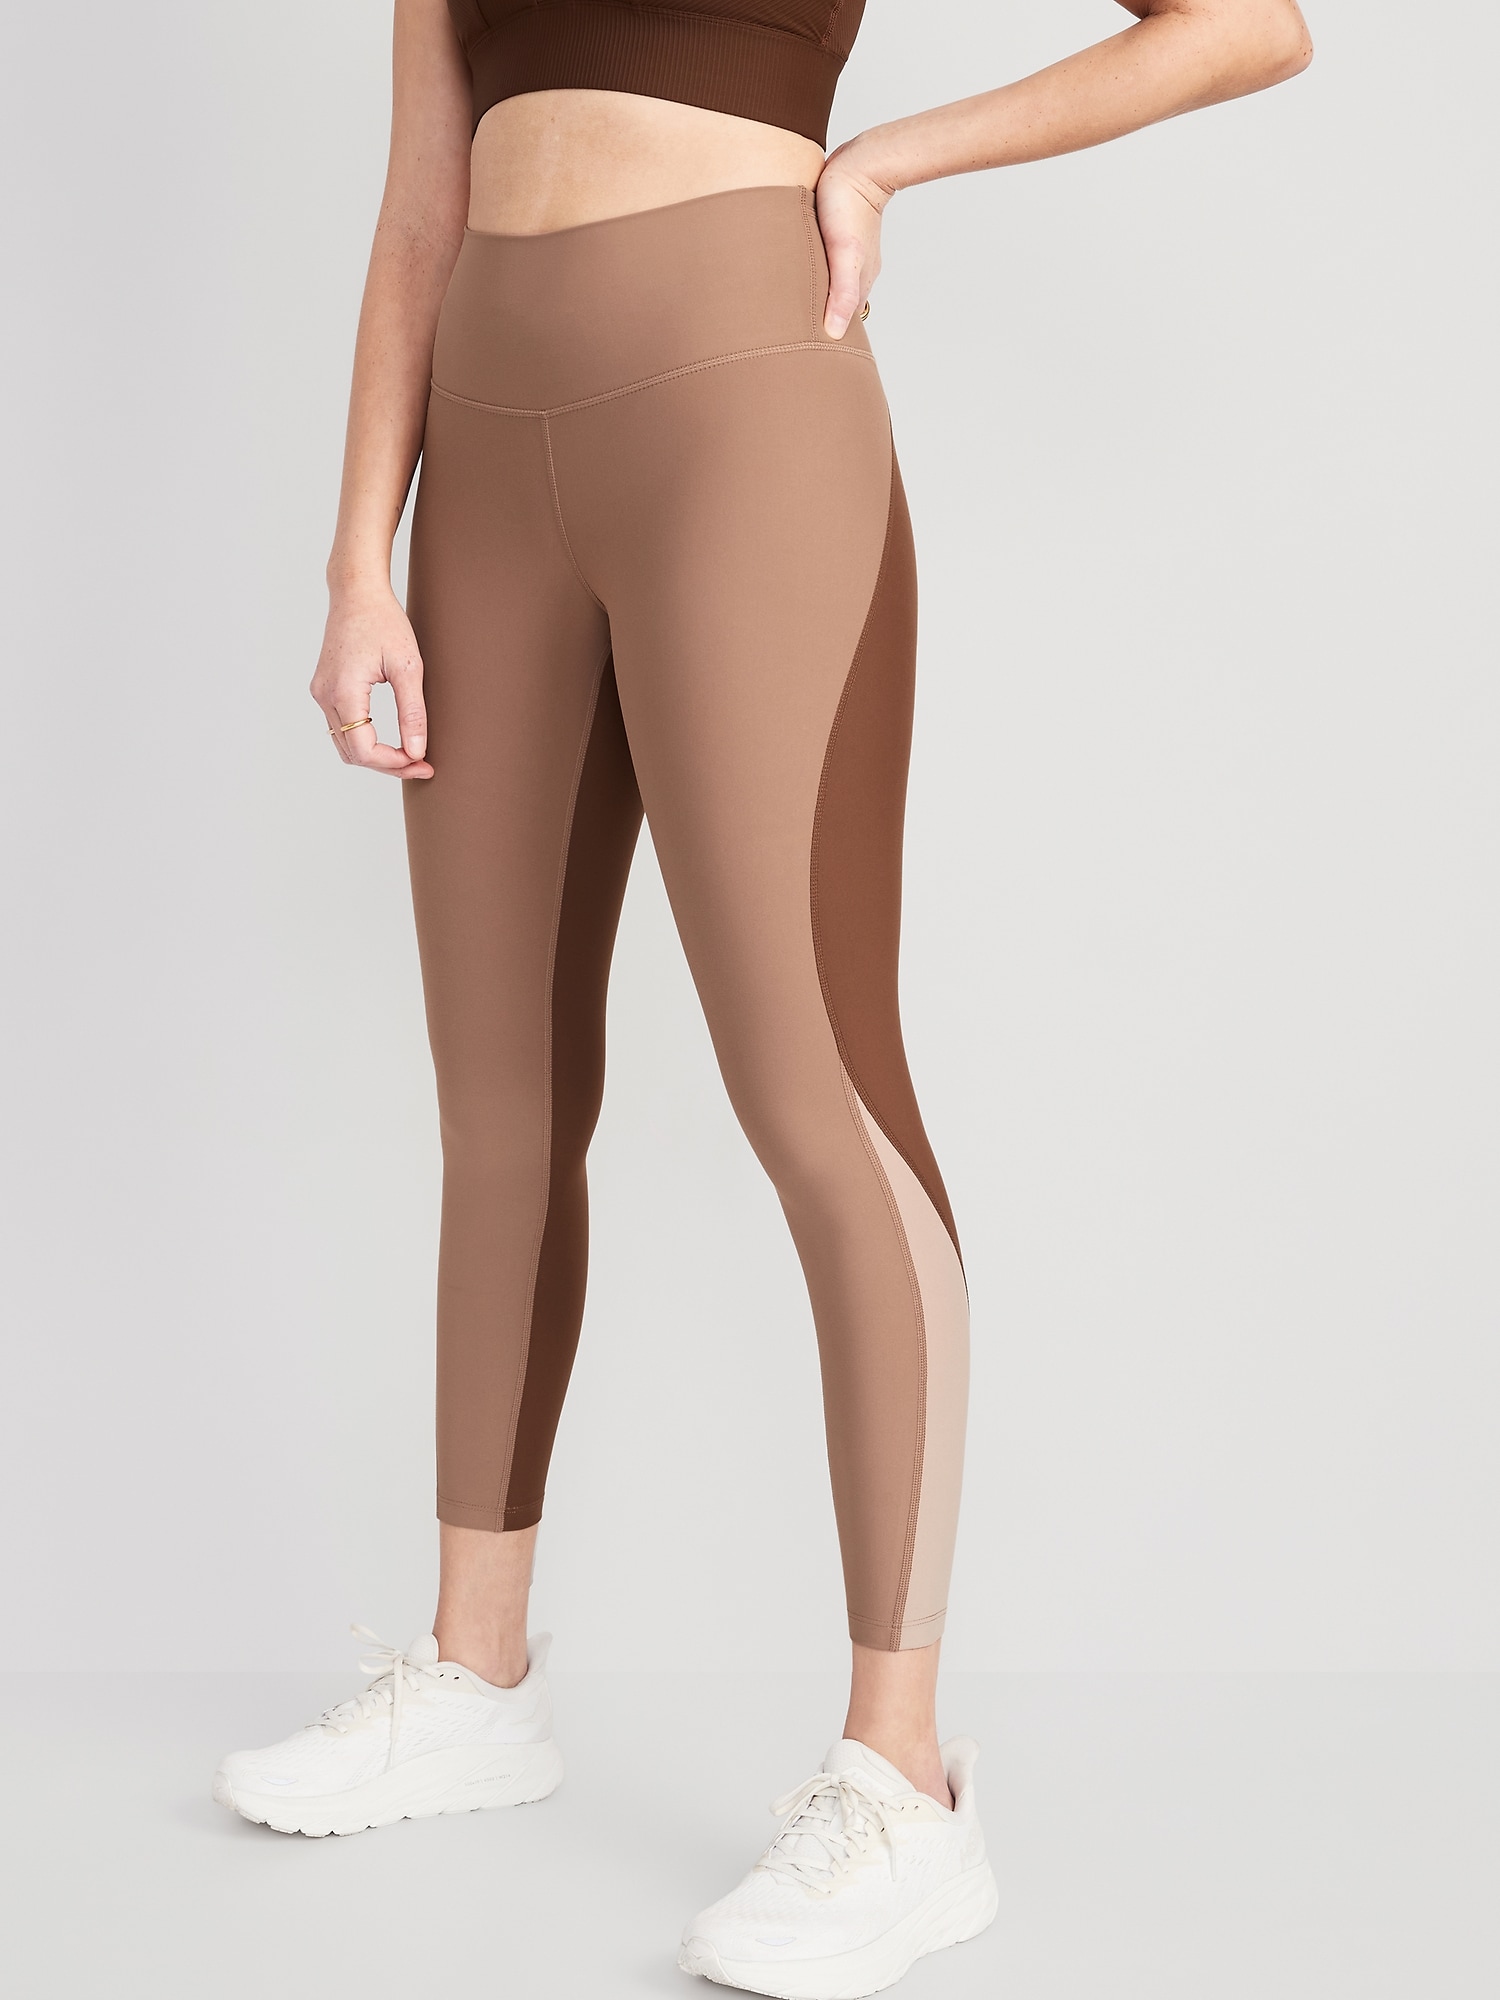 Old Navy High-Waisted PowerSoft Color-Block 7/8-Length Compression Leggings for Women beige. 1